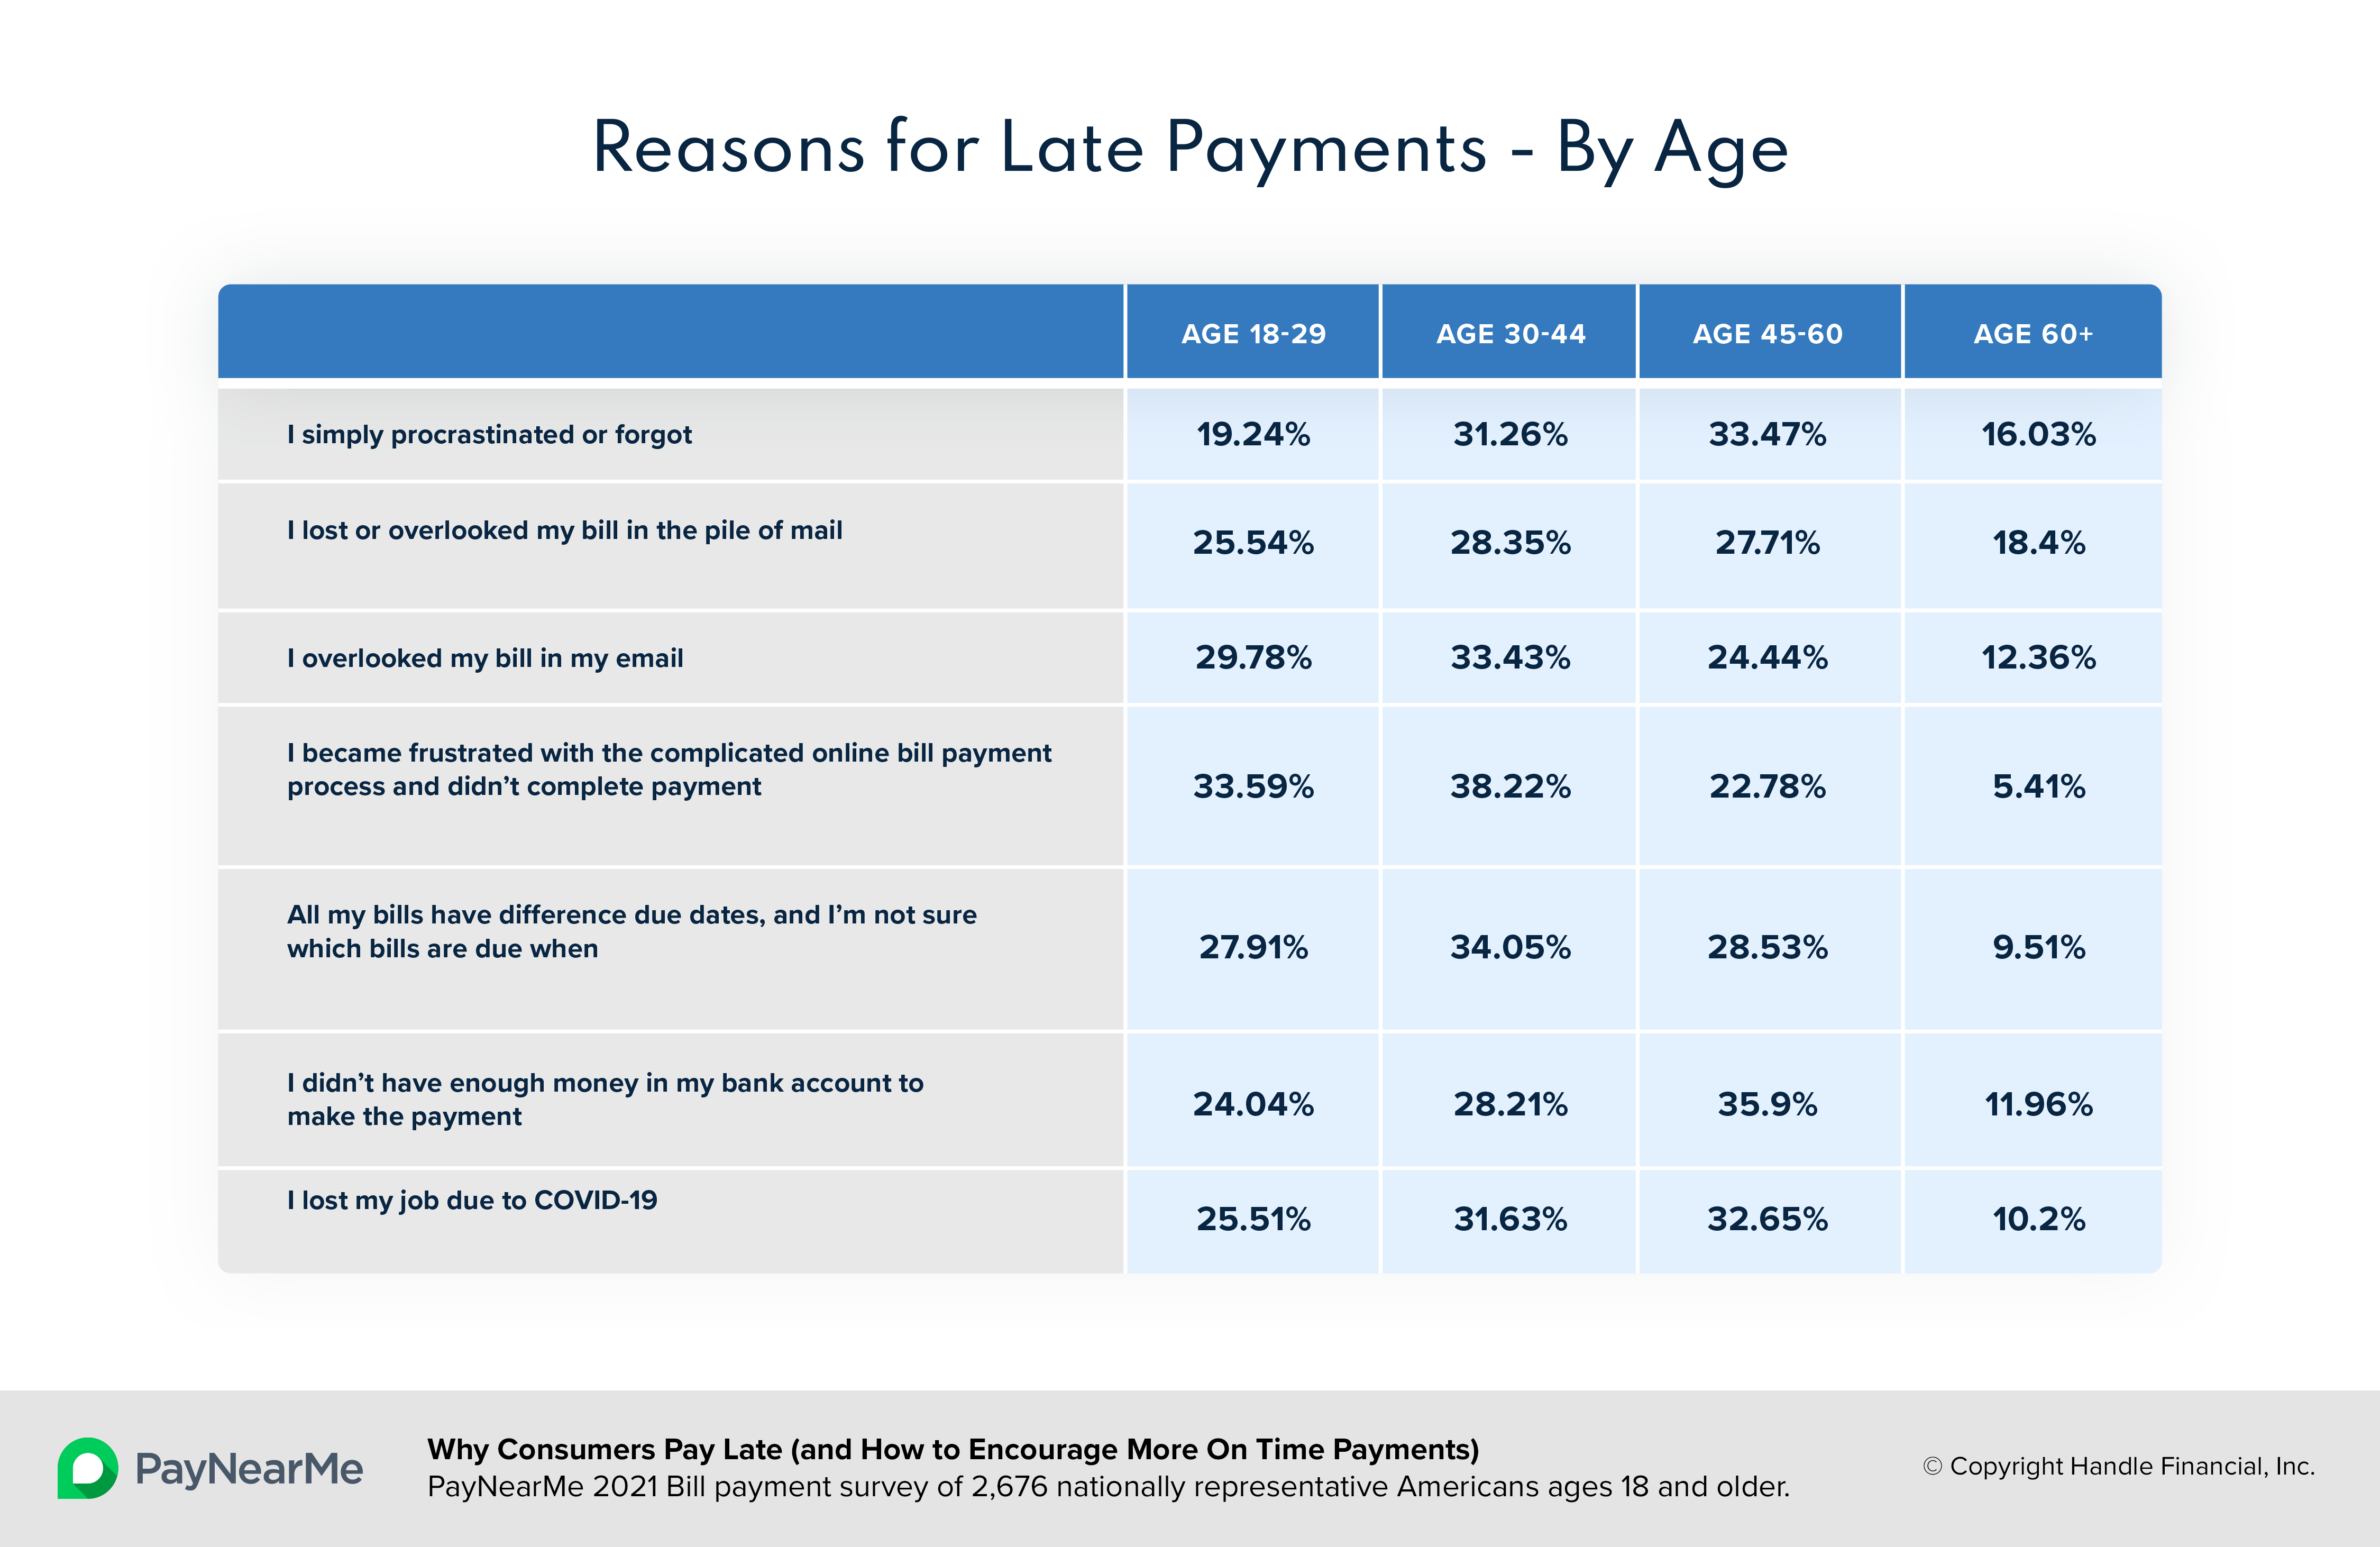 Across generations, consumers are missing payments. Young adults age 18-29 are most likely to miss payments, in part, because they have difficulty keeping track of due dates.